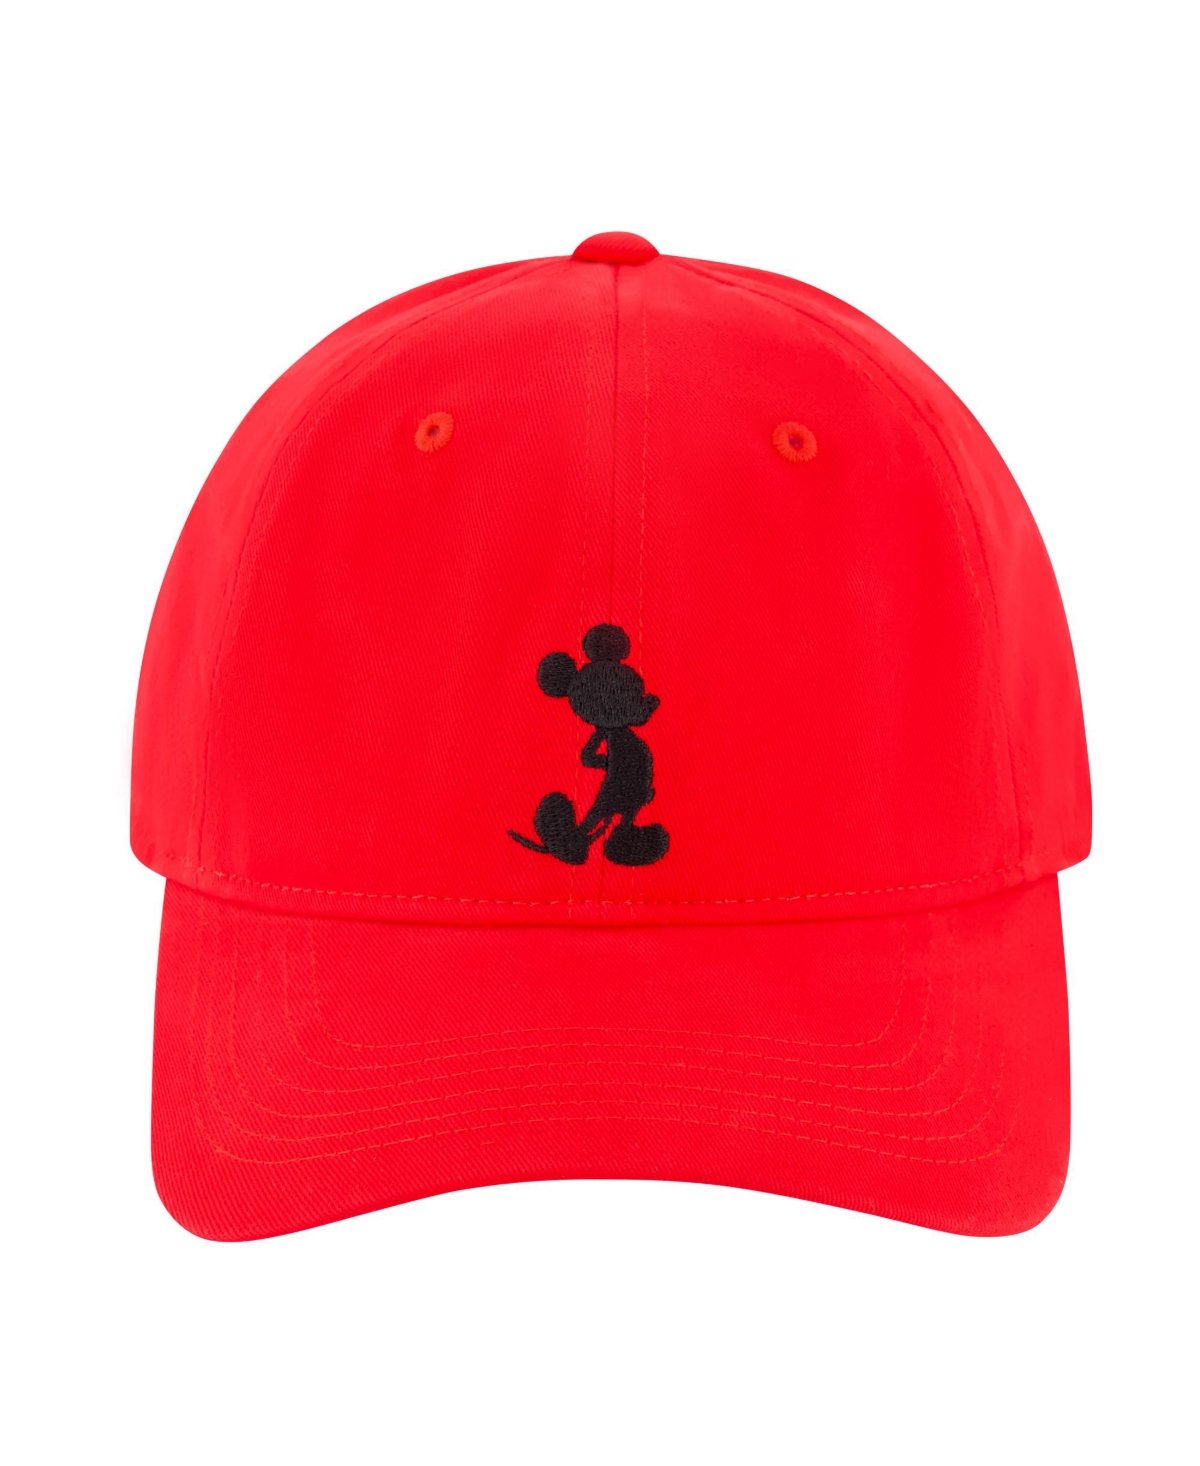 Men's Mickey Dad Cap Brush Washed Cotton Twill Embroidery - Red